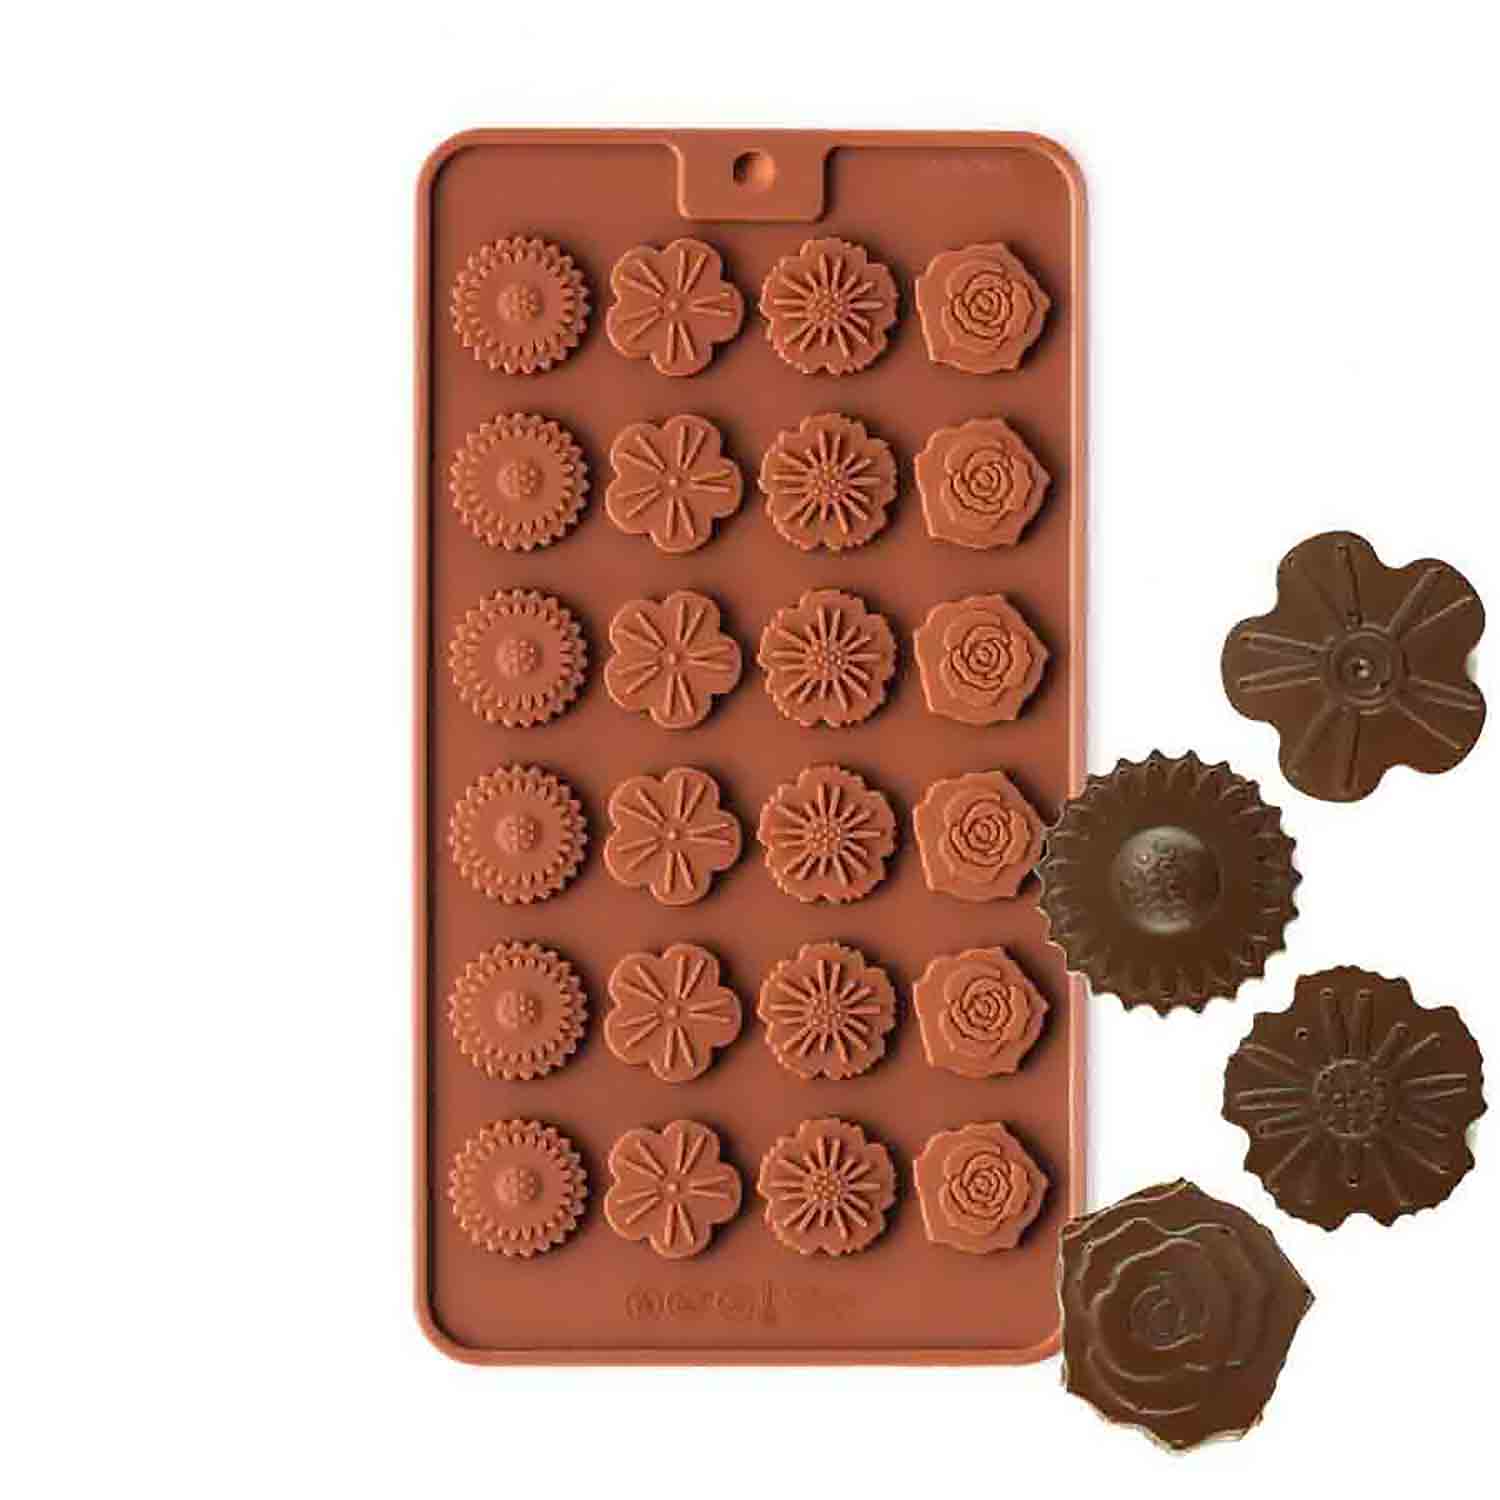 Flower Medallions Silicone Chocolate Candy Mold - CKSA